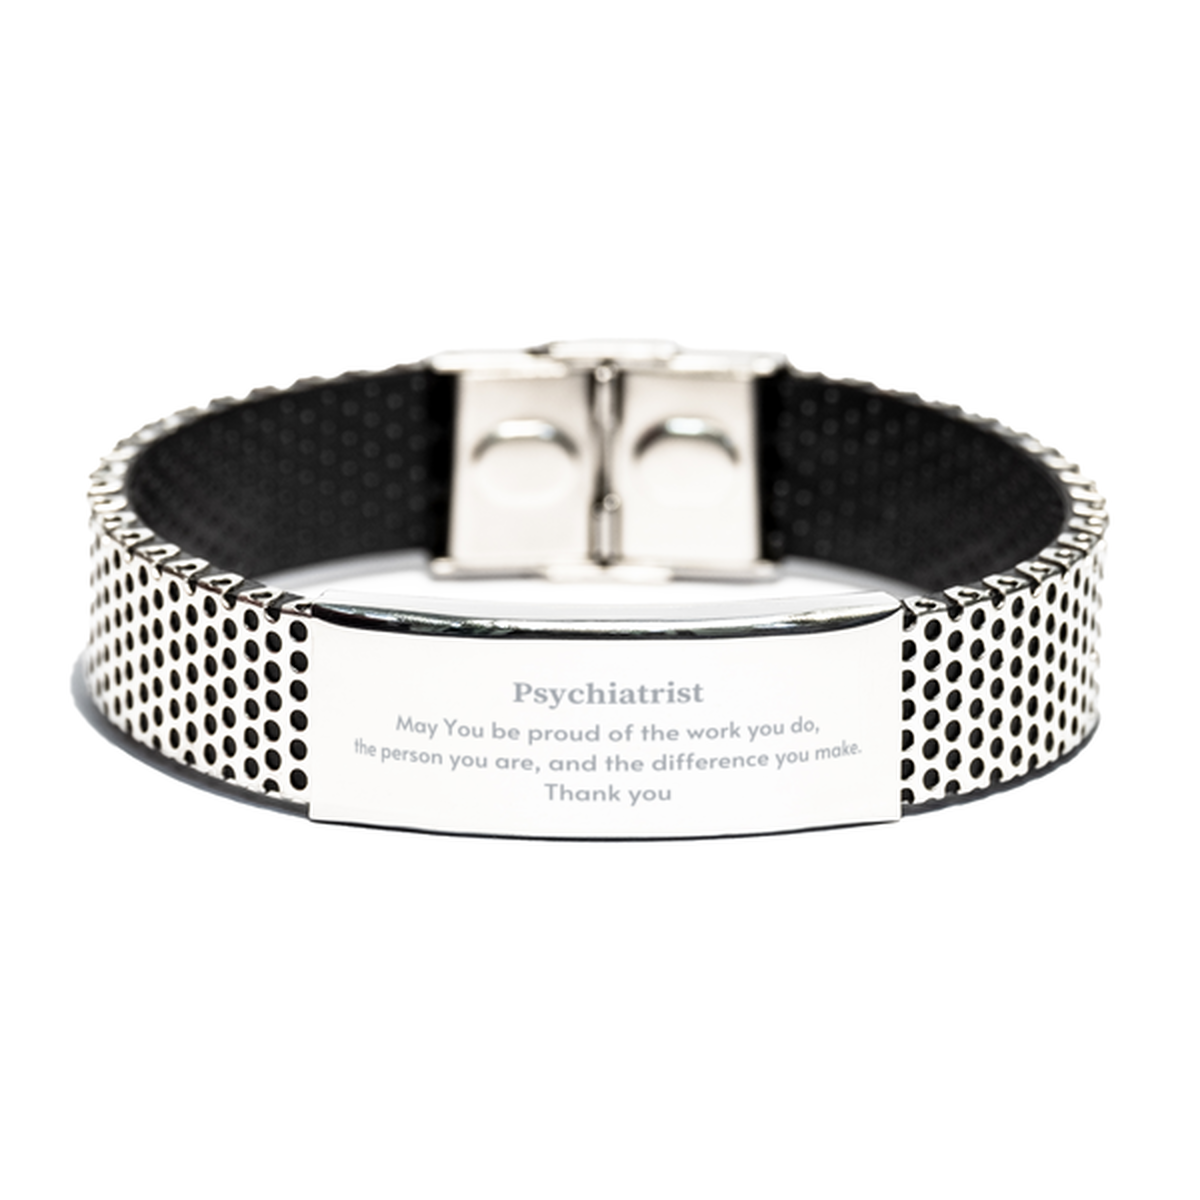 Heartwarming Stainless Steel Bracelet Retirement Coworkers Gifts for Psychiatrist, Psychiatrist May You be proud of the work you do, the person you are Gifts for Boss Men Women Friends